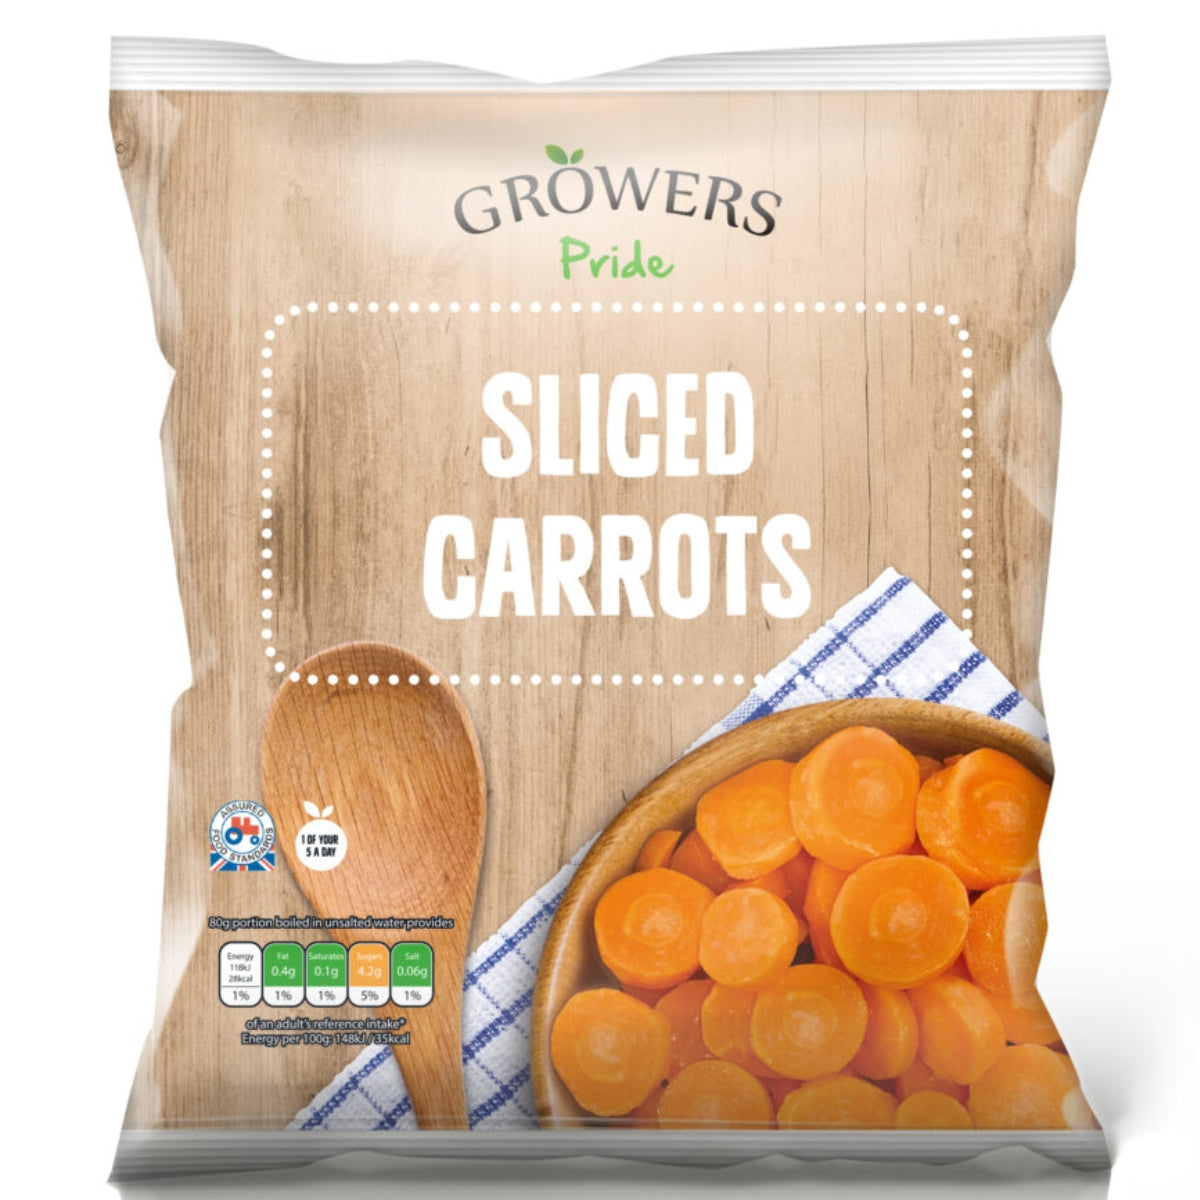 A bag of Growers Pride - Sliced Carrots - 450g on a white background.